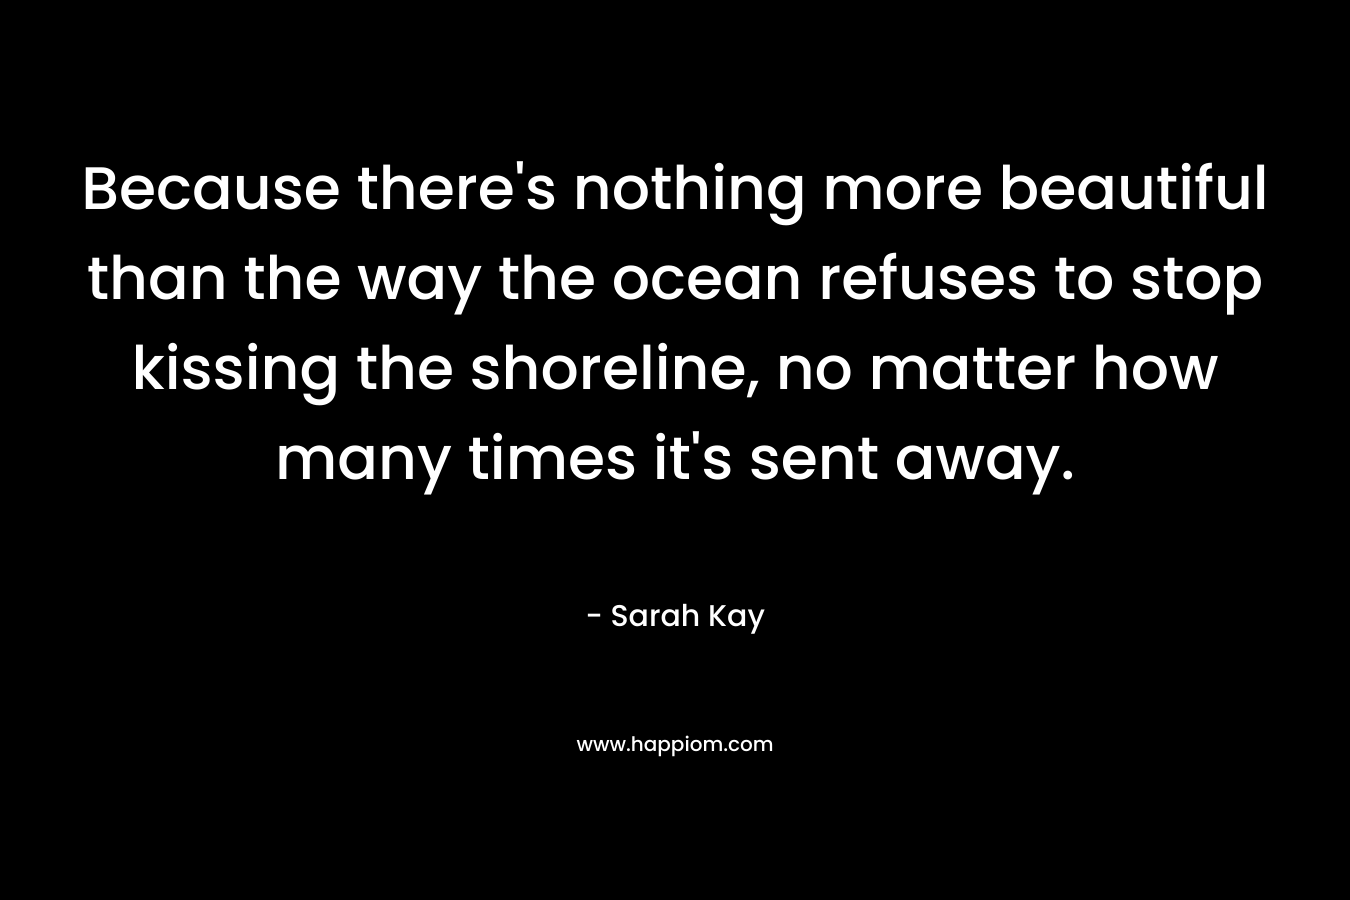 Because there’s nothing more beautiful than the way the ocean refuses to stop kissing the shoreline, no matter how many times it’s sent away. – Sarah Kay